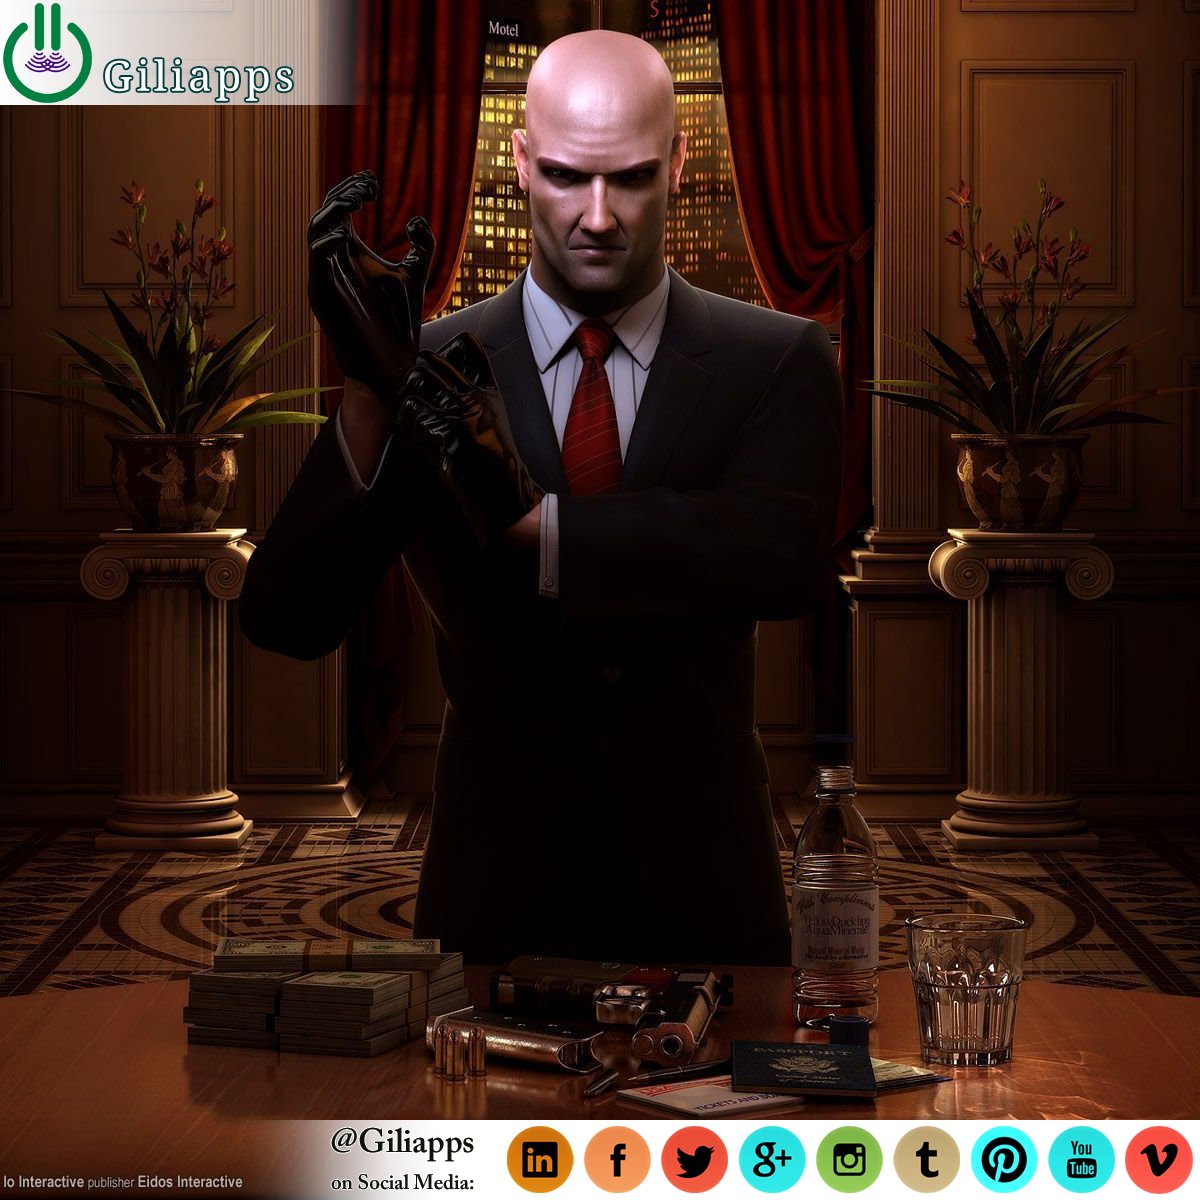 It Appears 'Hitman: Absolution' and 'Blood Money' Are Coming to PS4 and Xbox One